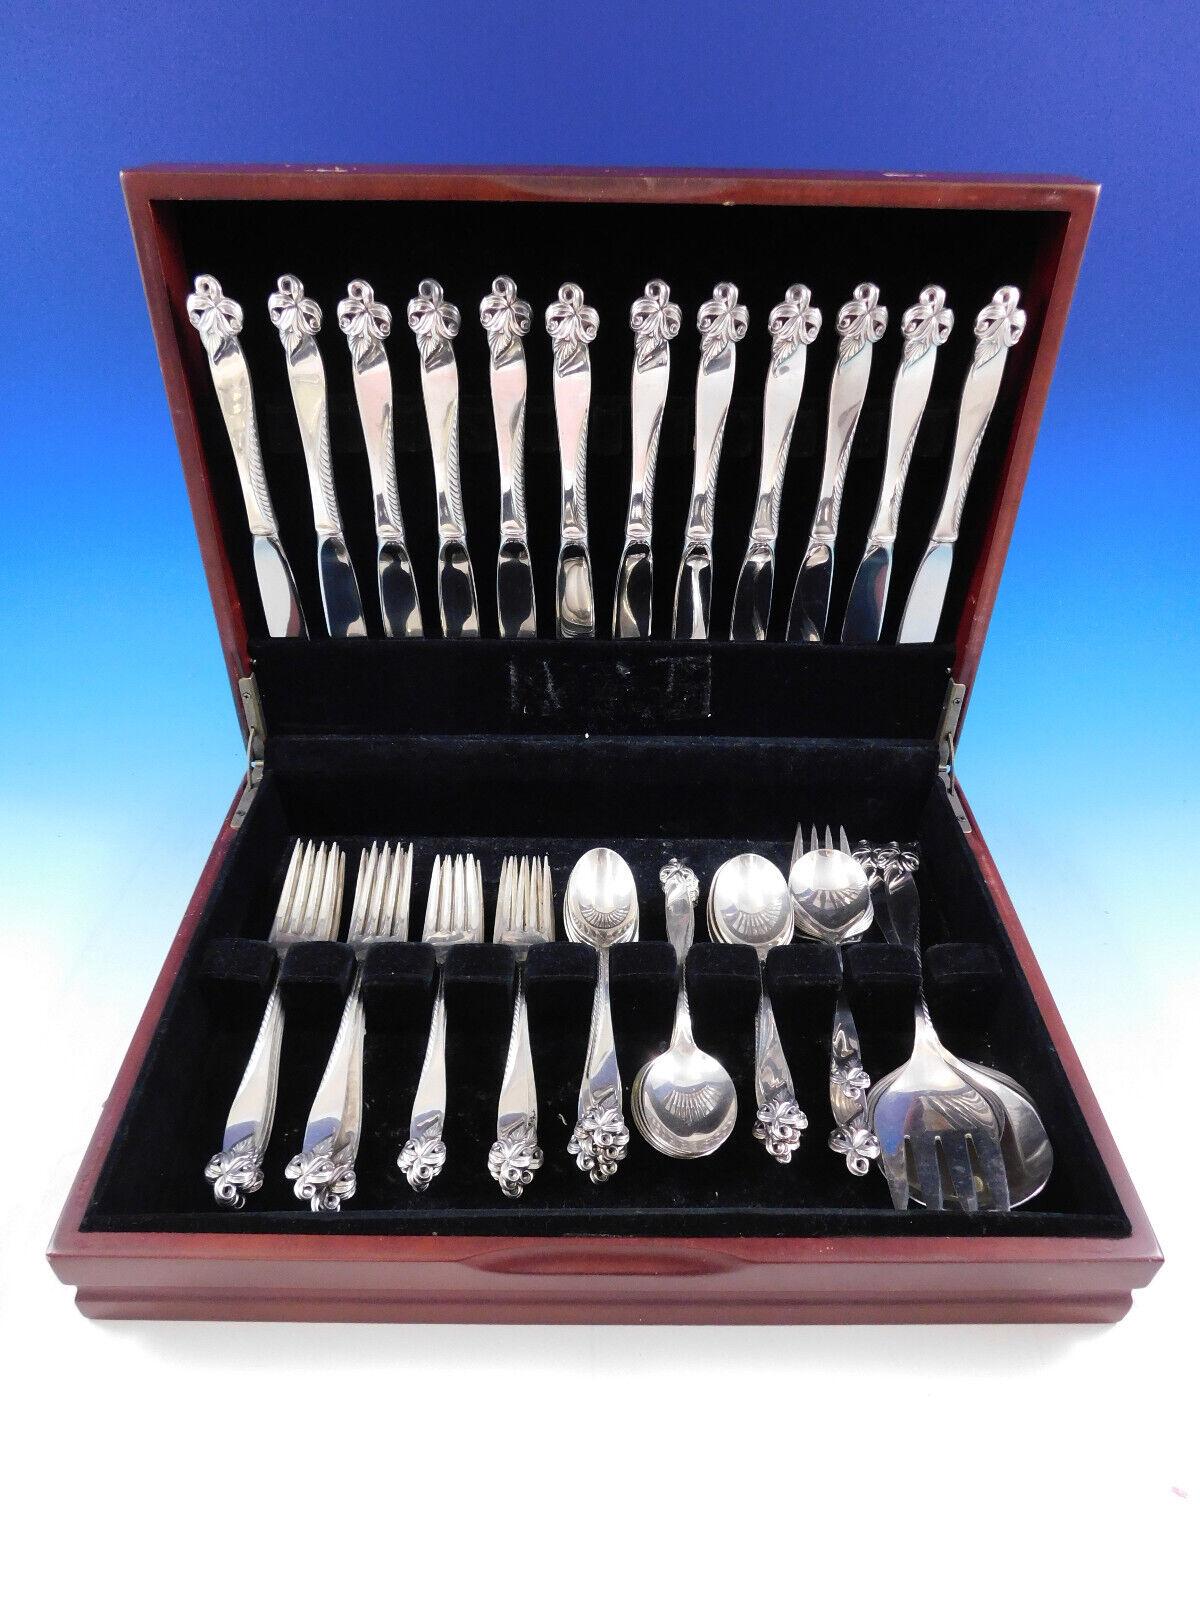 Orchid Elegance by Wallace Sterling Silver flatware set with unique pierced, floral shaped handle - 64 pieces. This set includes:

12 Knives, 9